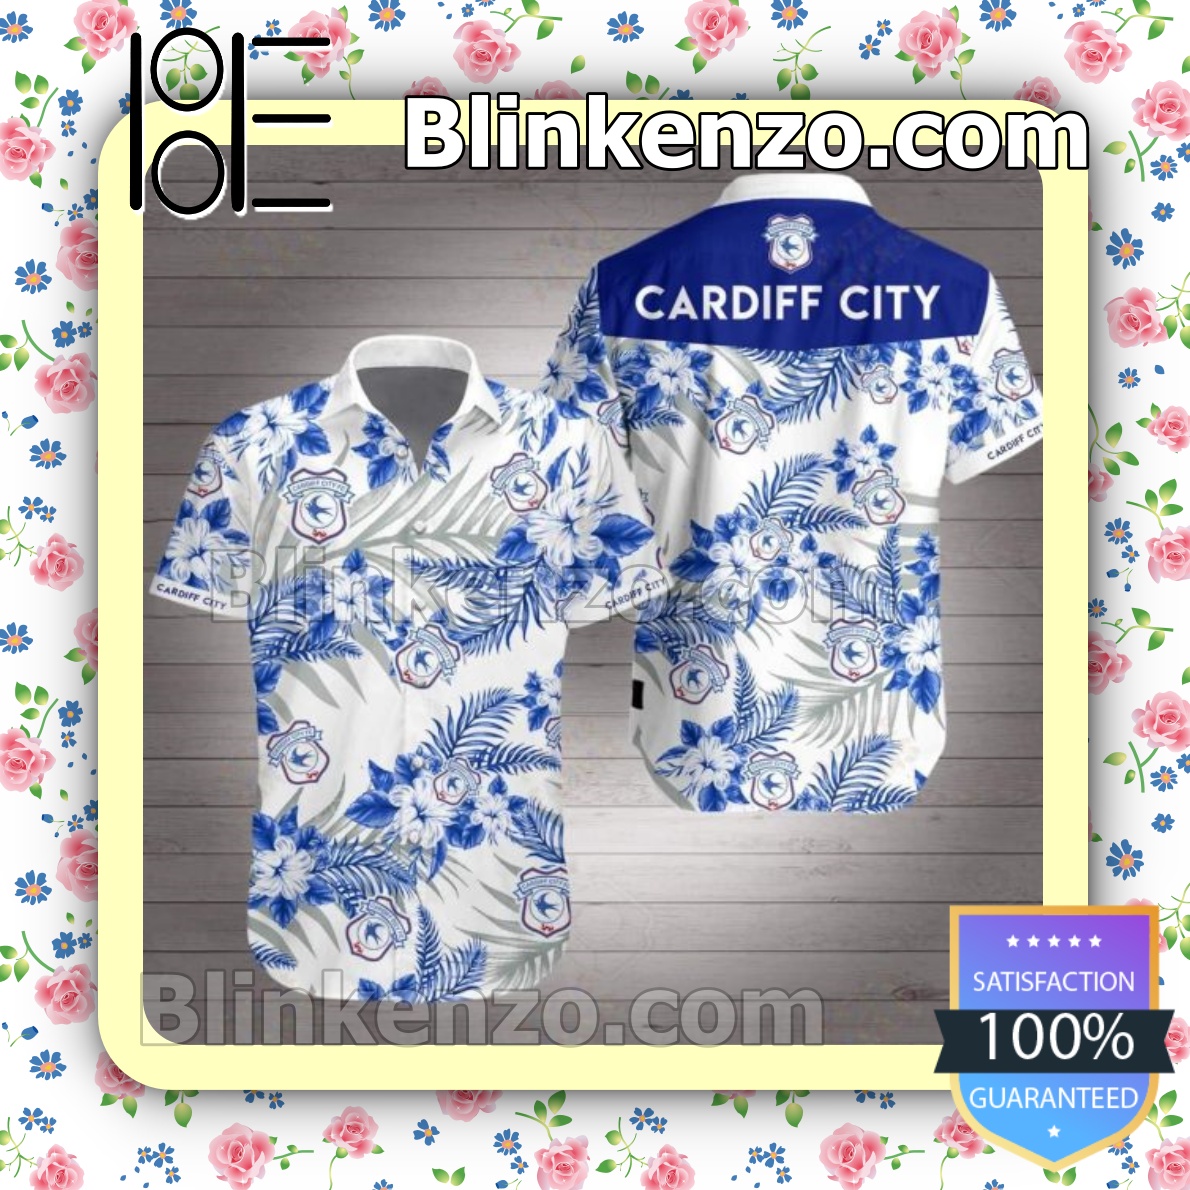 Drop Shipping Cardiff City Blue Tropical Floral White Summer Shirts